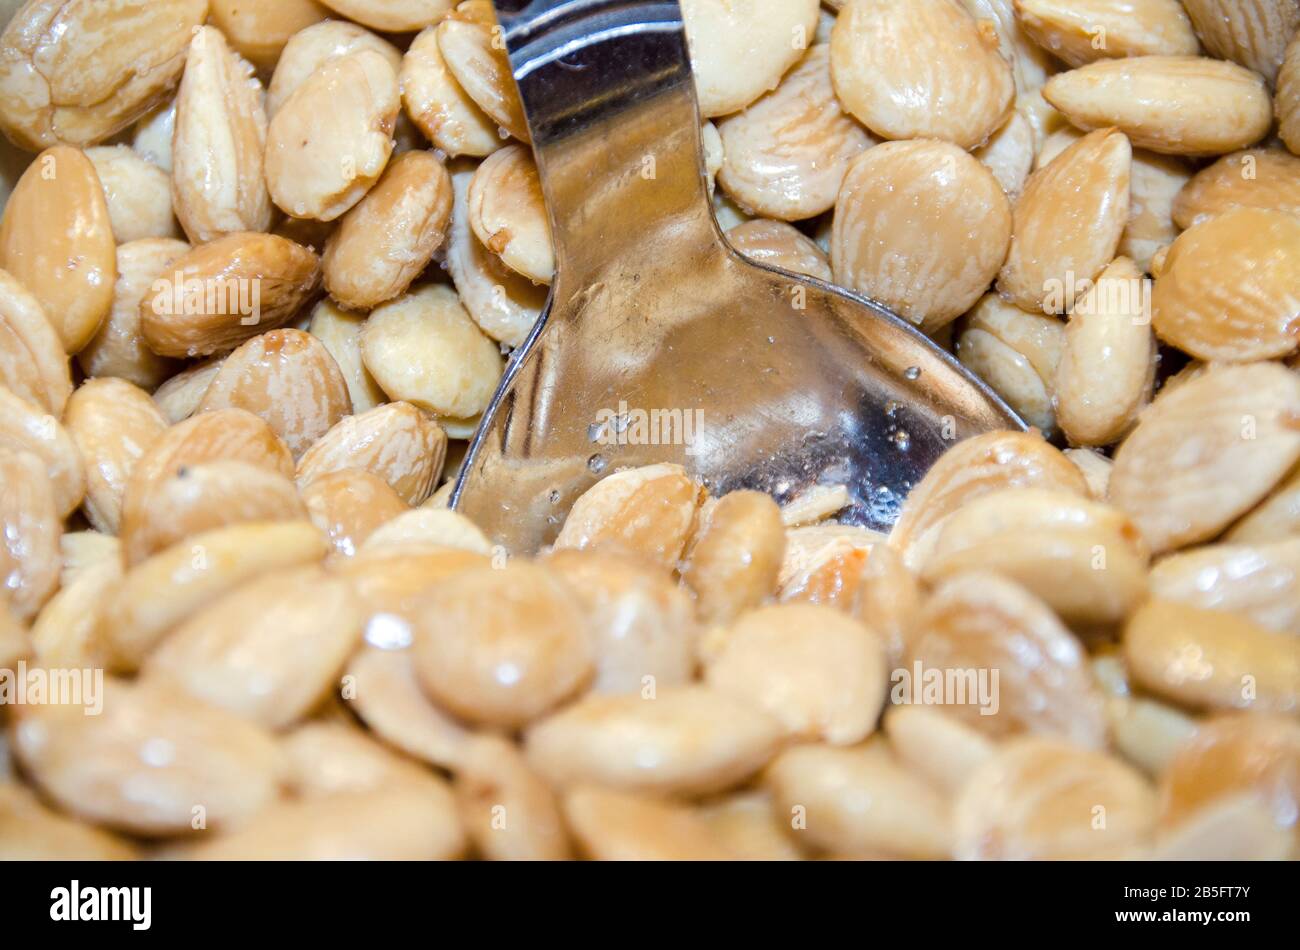 Salted almonds snack Stock Photo